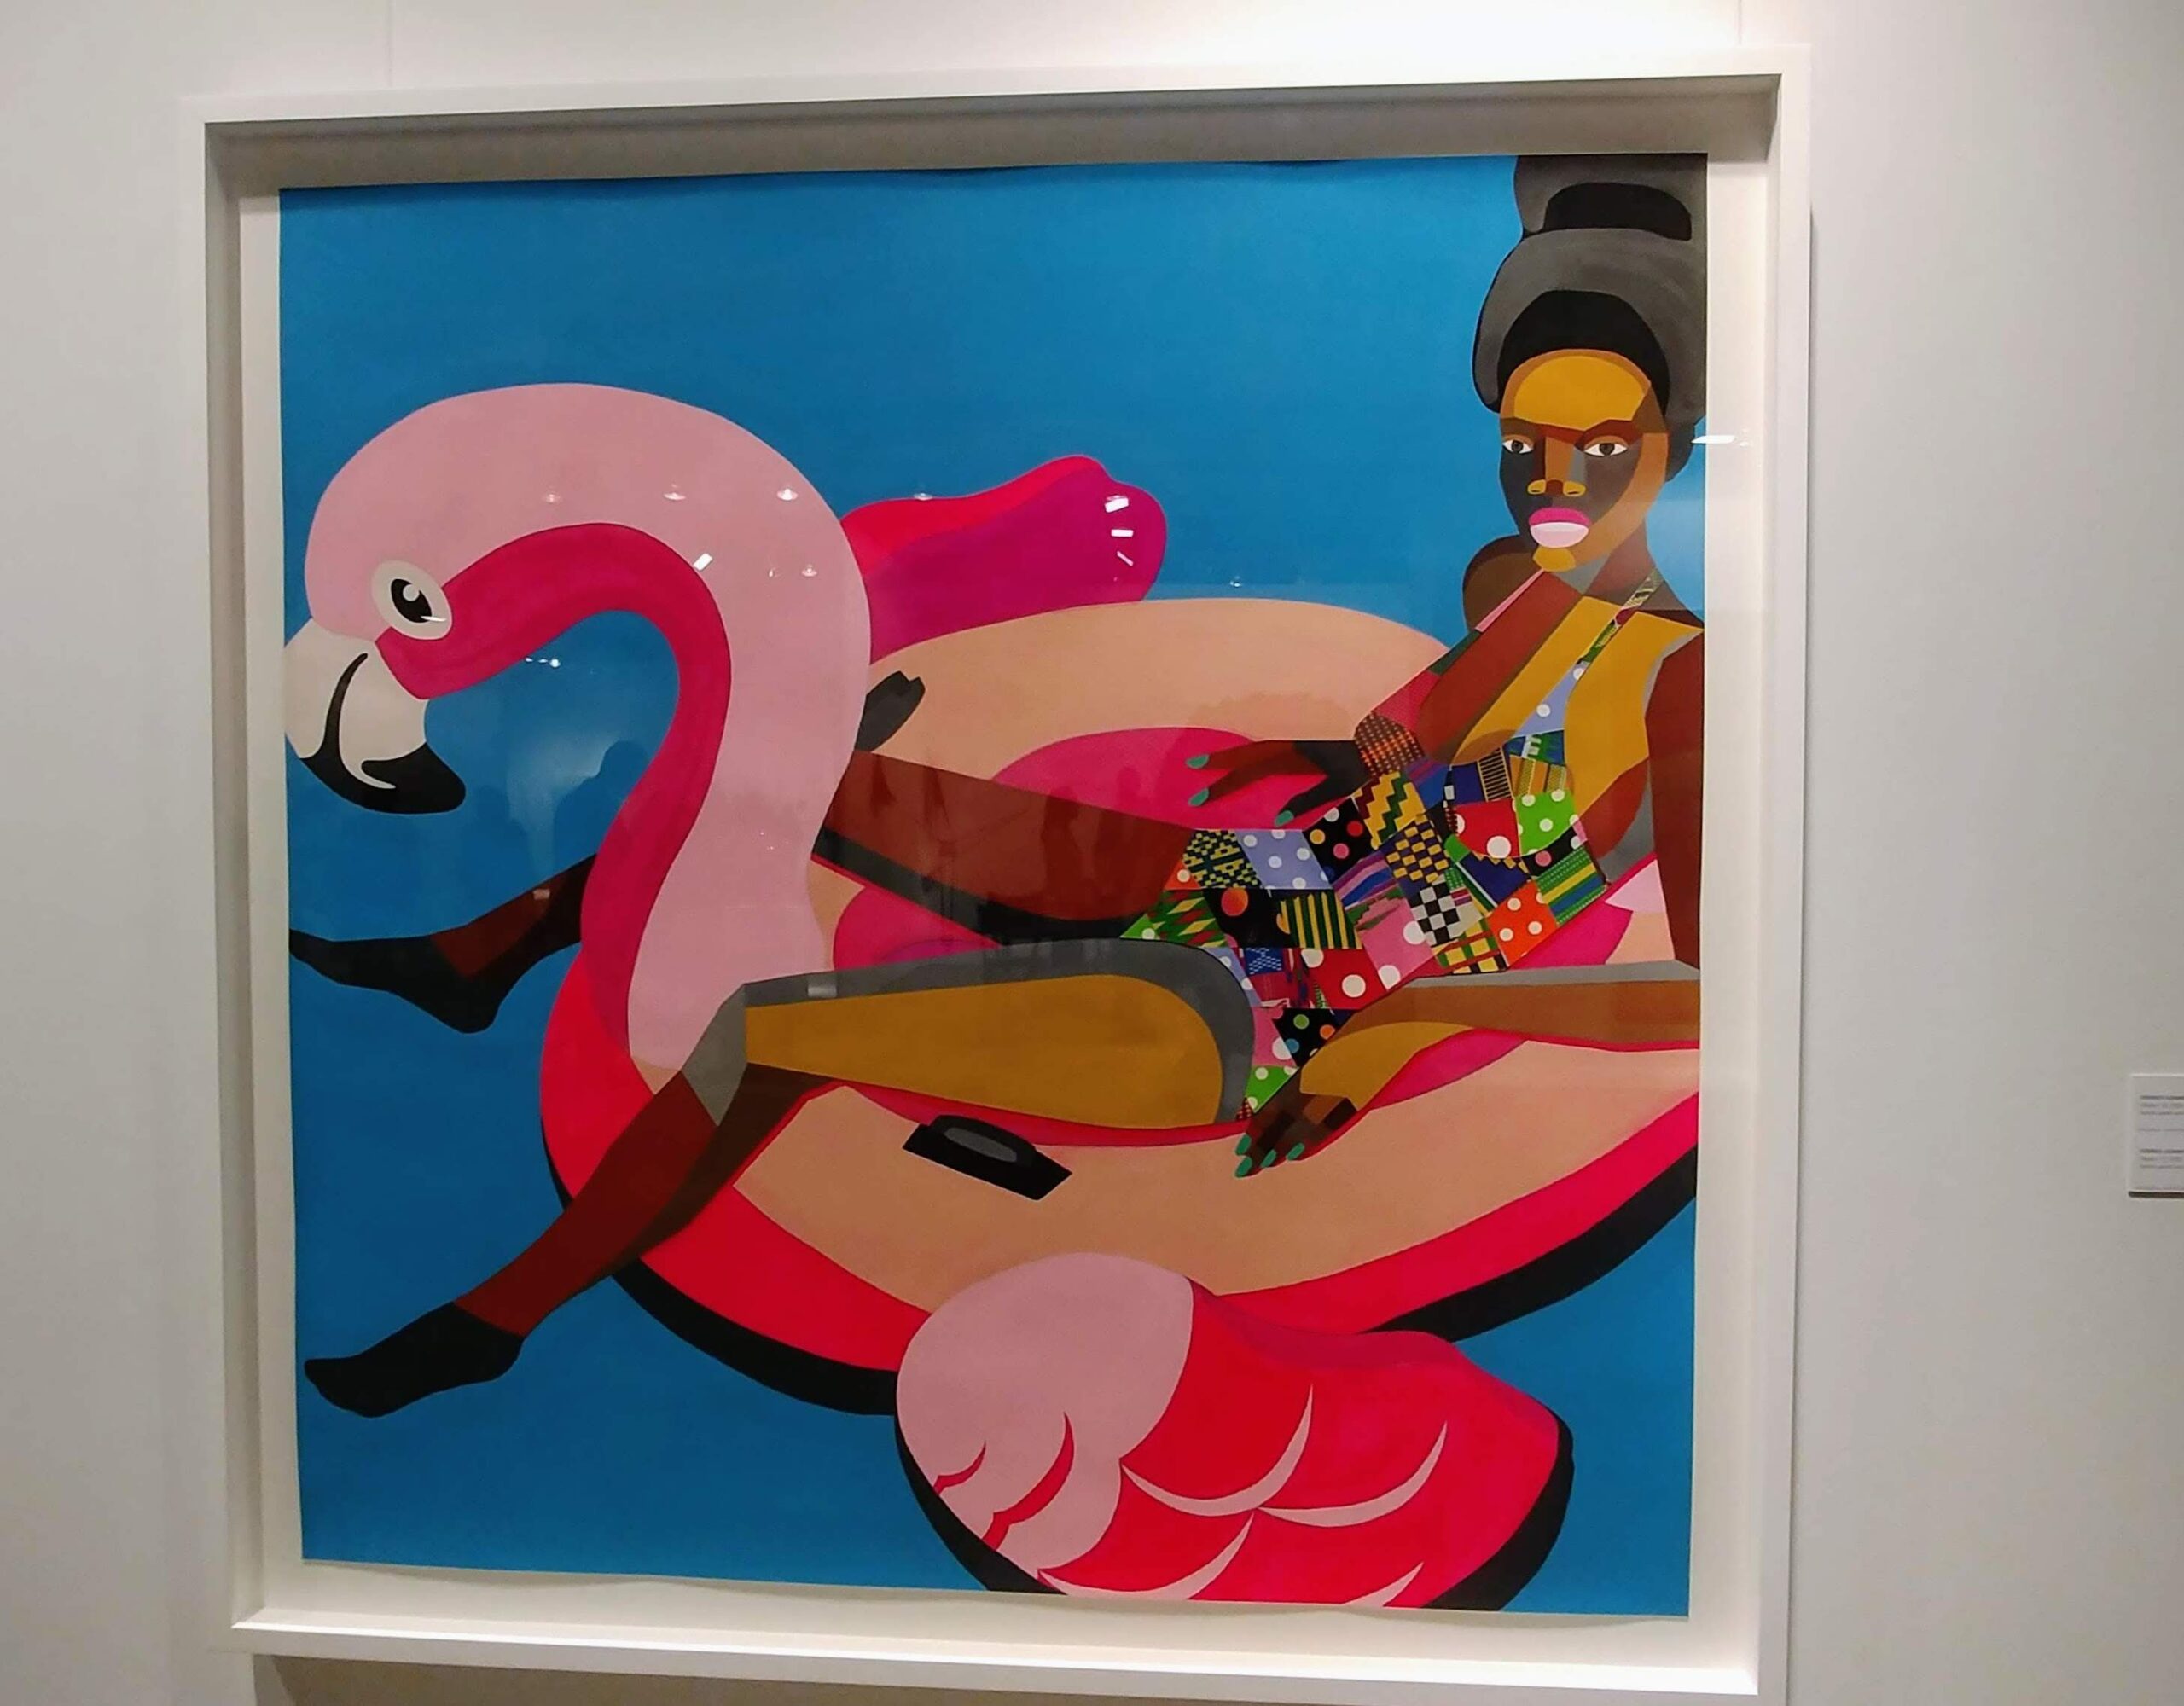 abstract art print with a lady sitting on a pink flamingo floaty - Expo 2018 Floater 75, 2018 ©Derrick Adams.